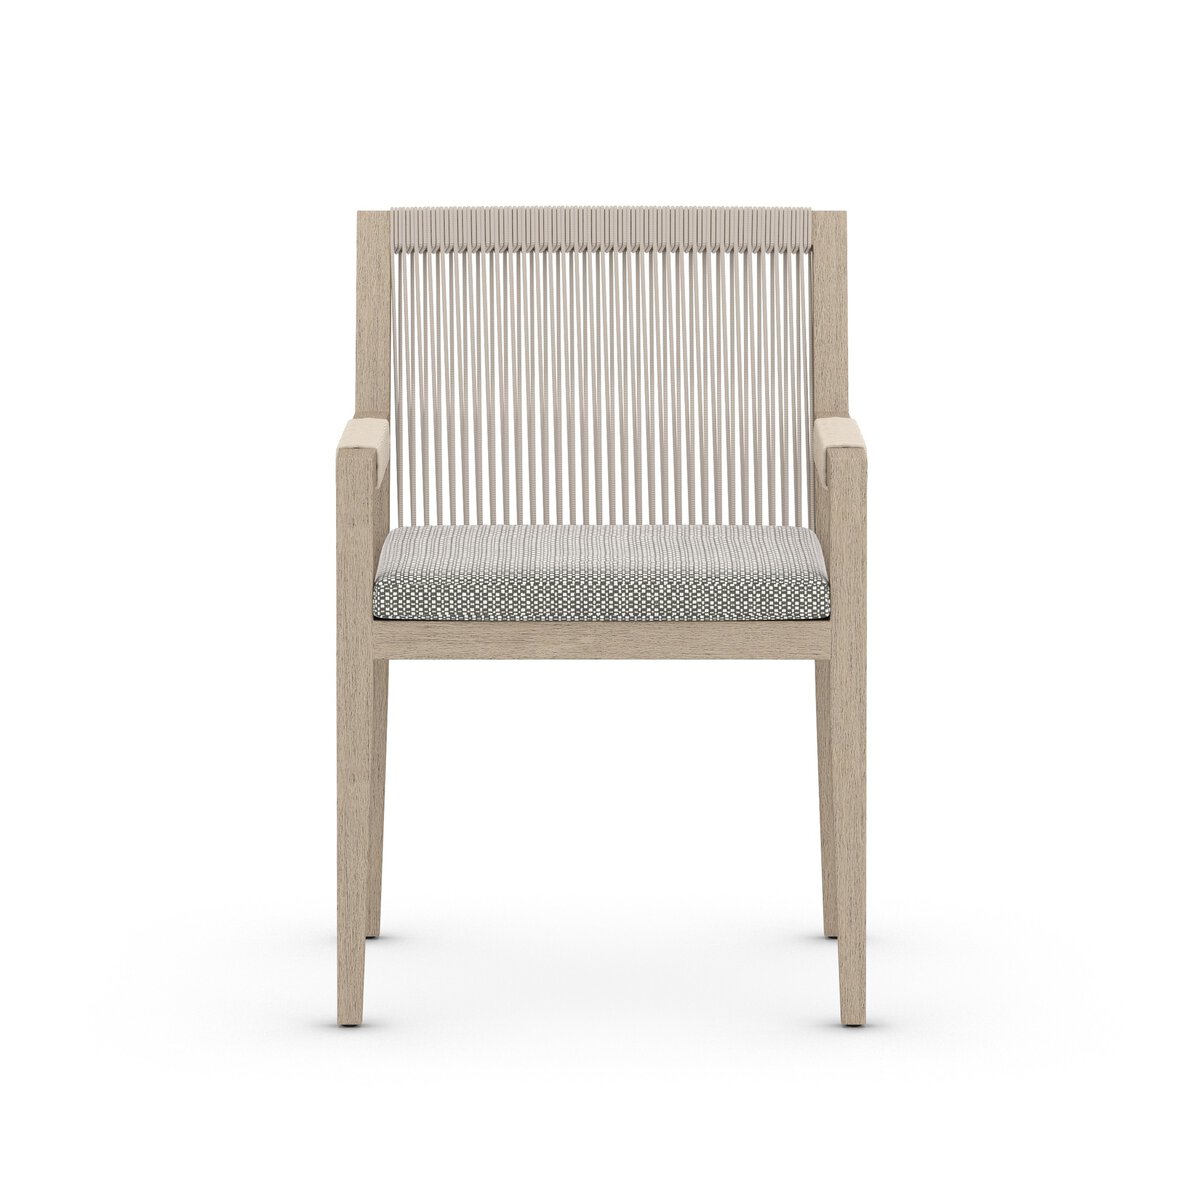 Sherwood Outdoor Dining Armchair, Washed Brown